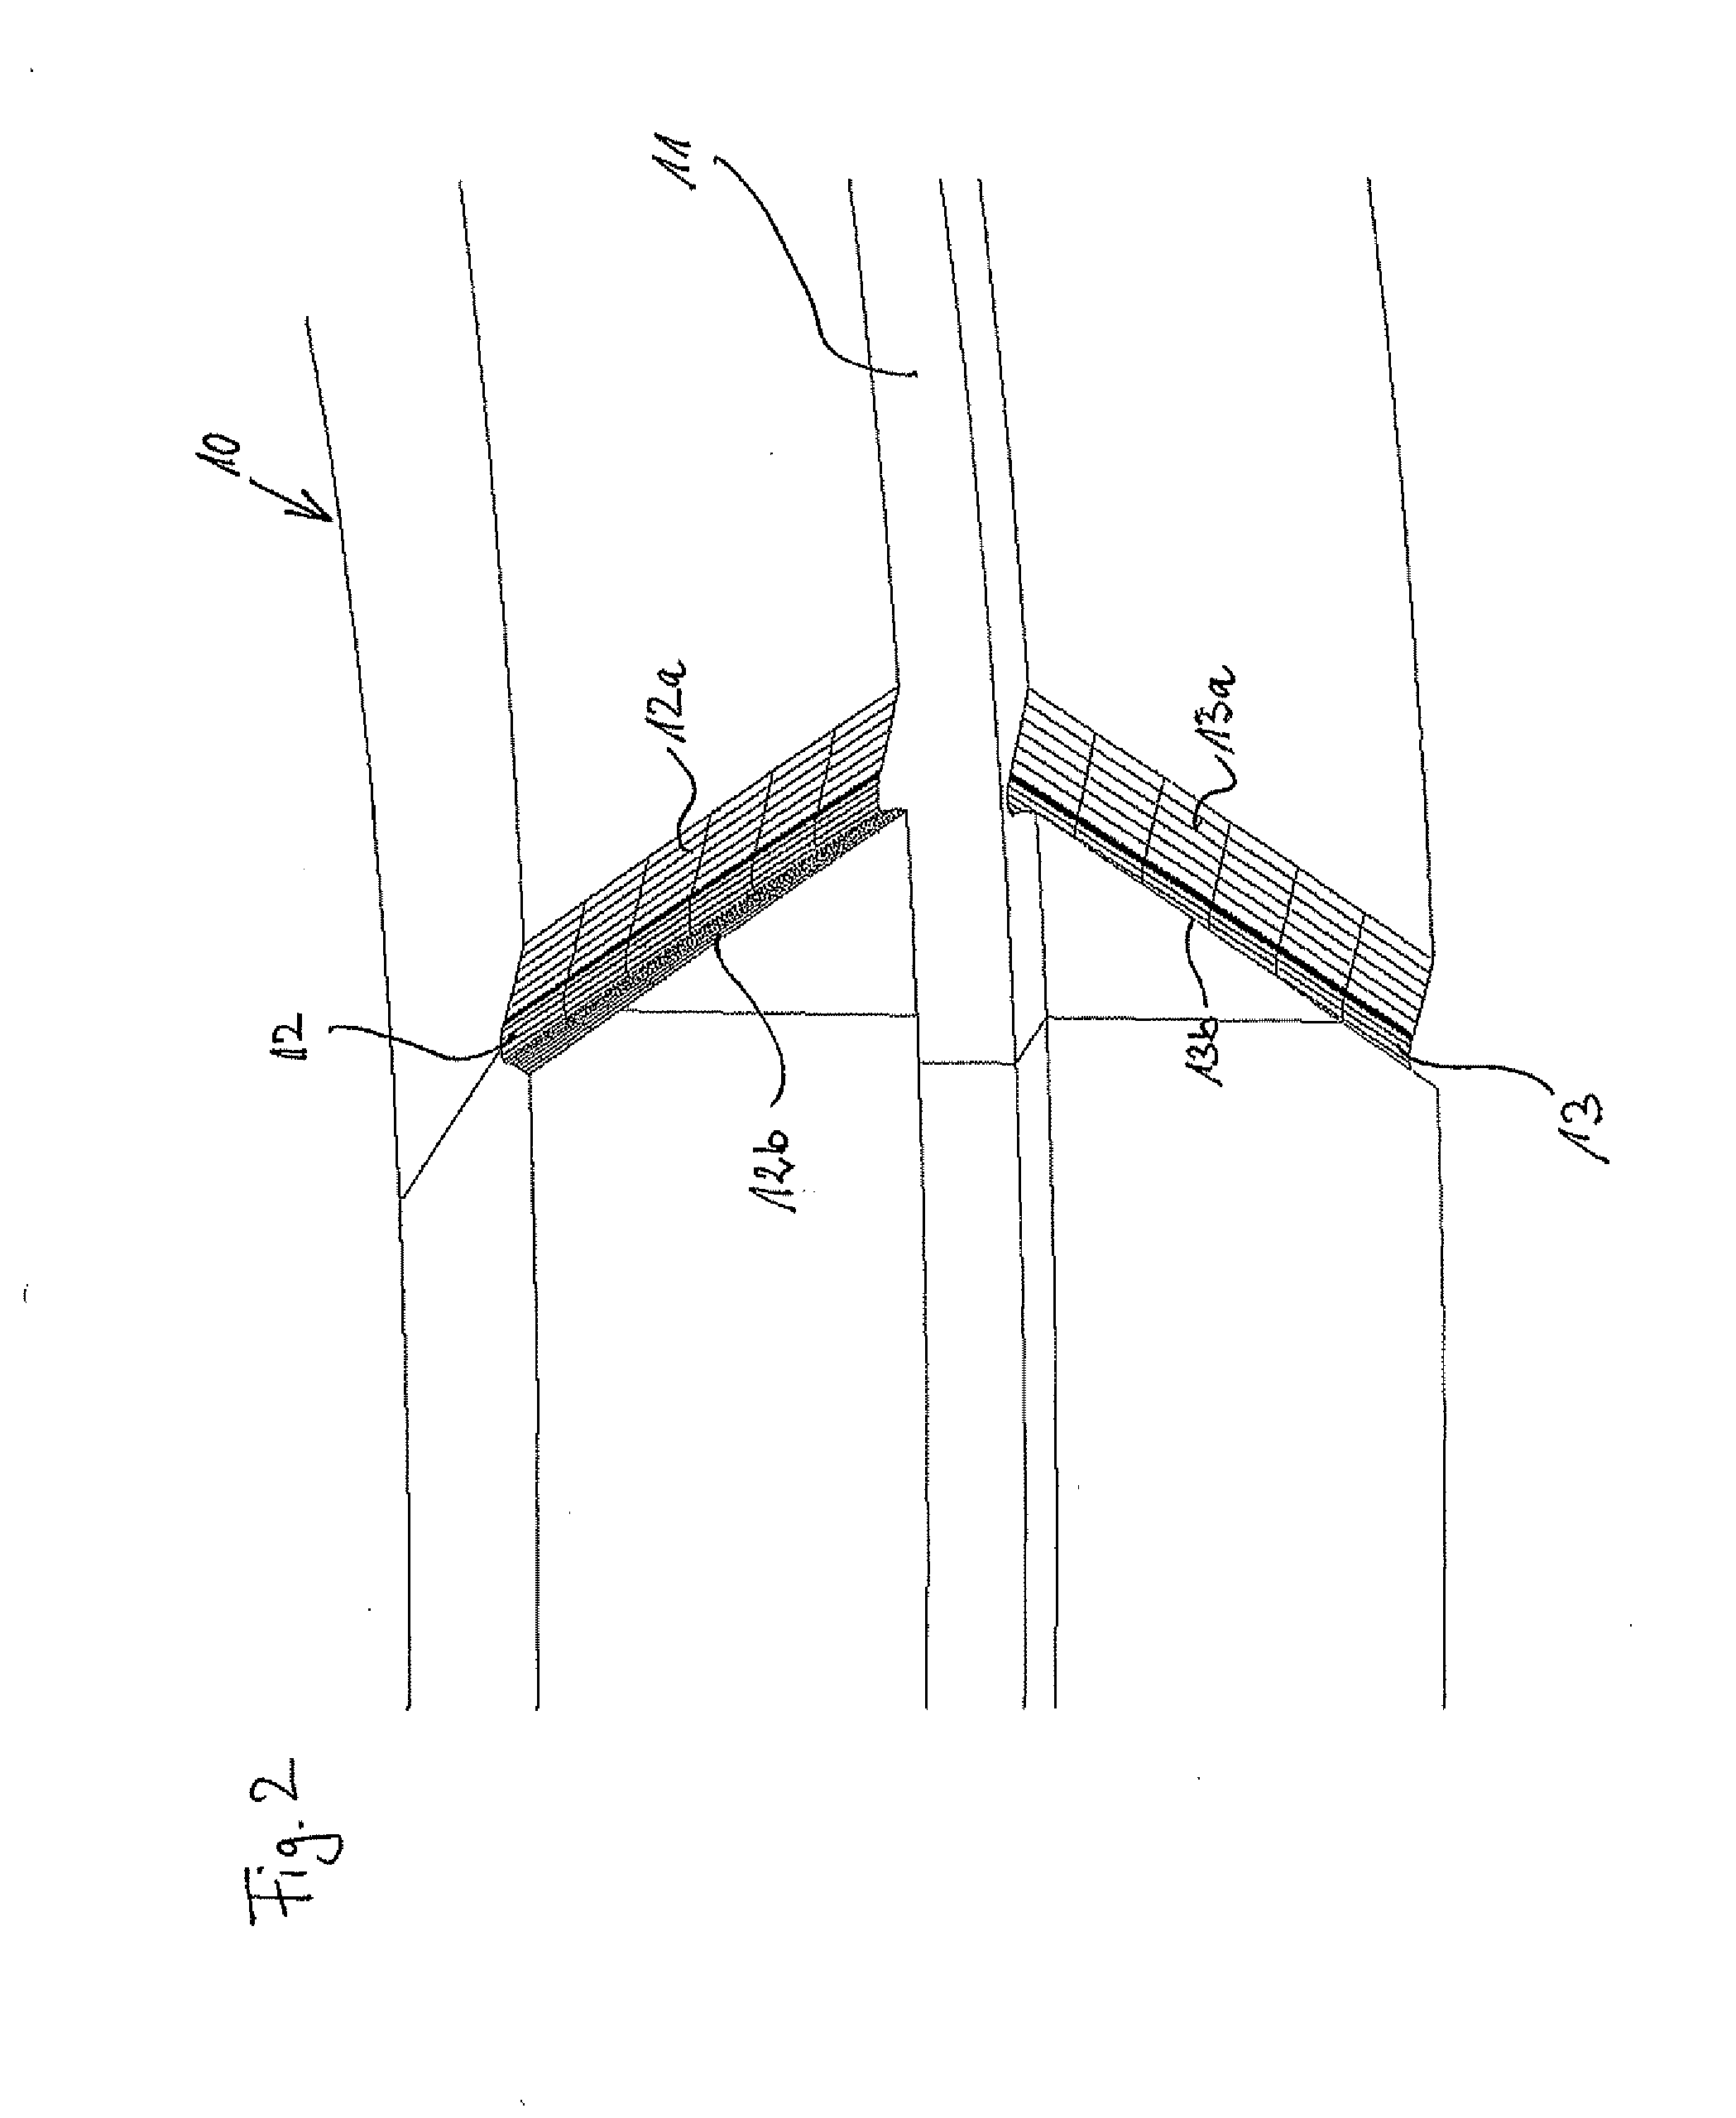 Process for producing a toothed wheel having a herringbone gearing and a process and an apparatus for generating control data to form a herringbone gearing on a workpiece.